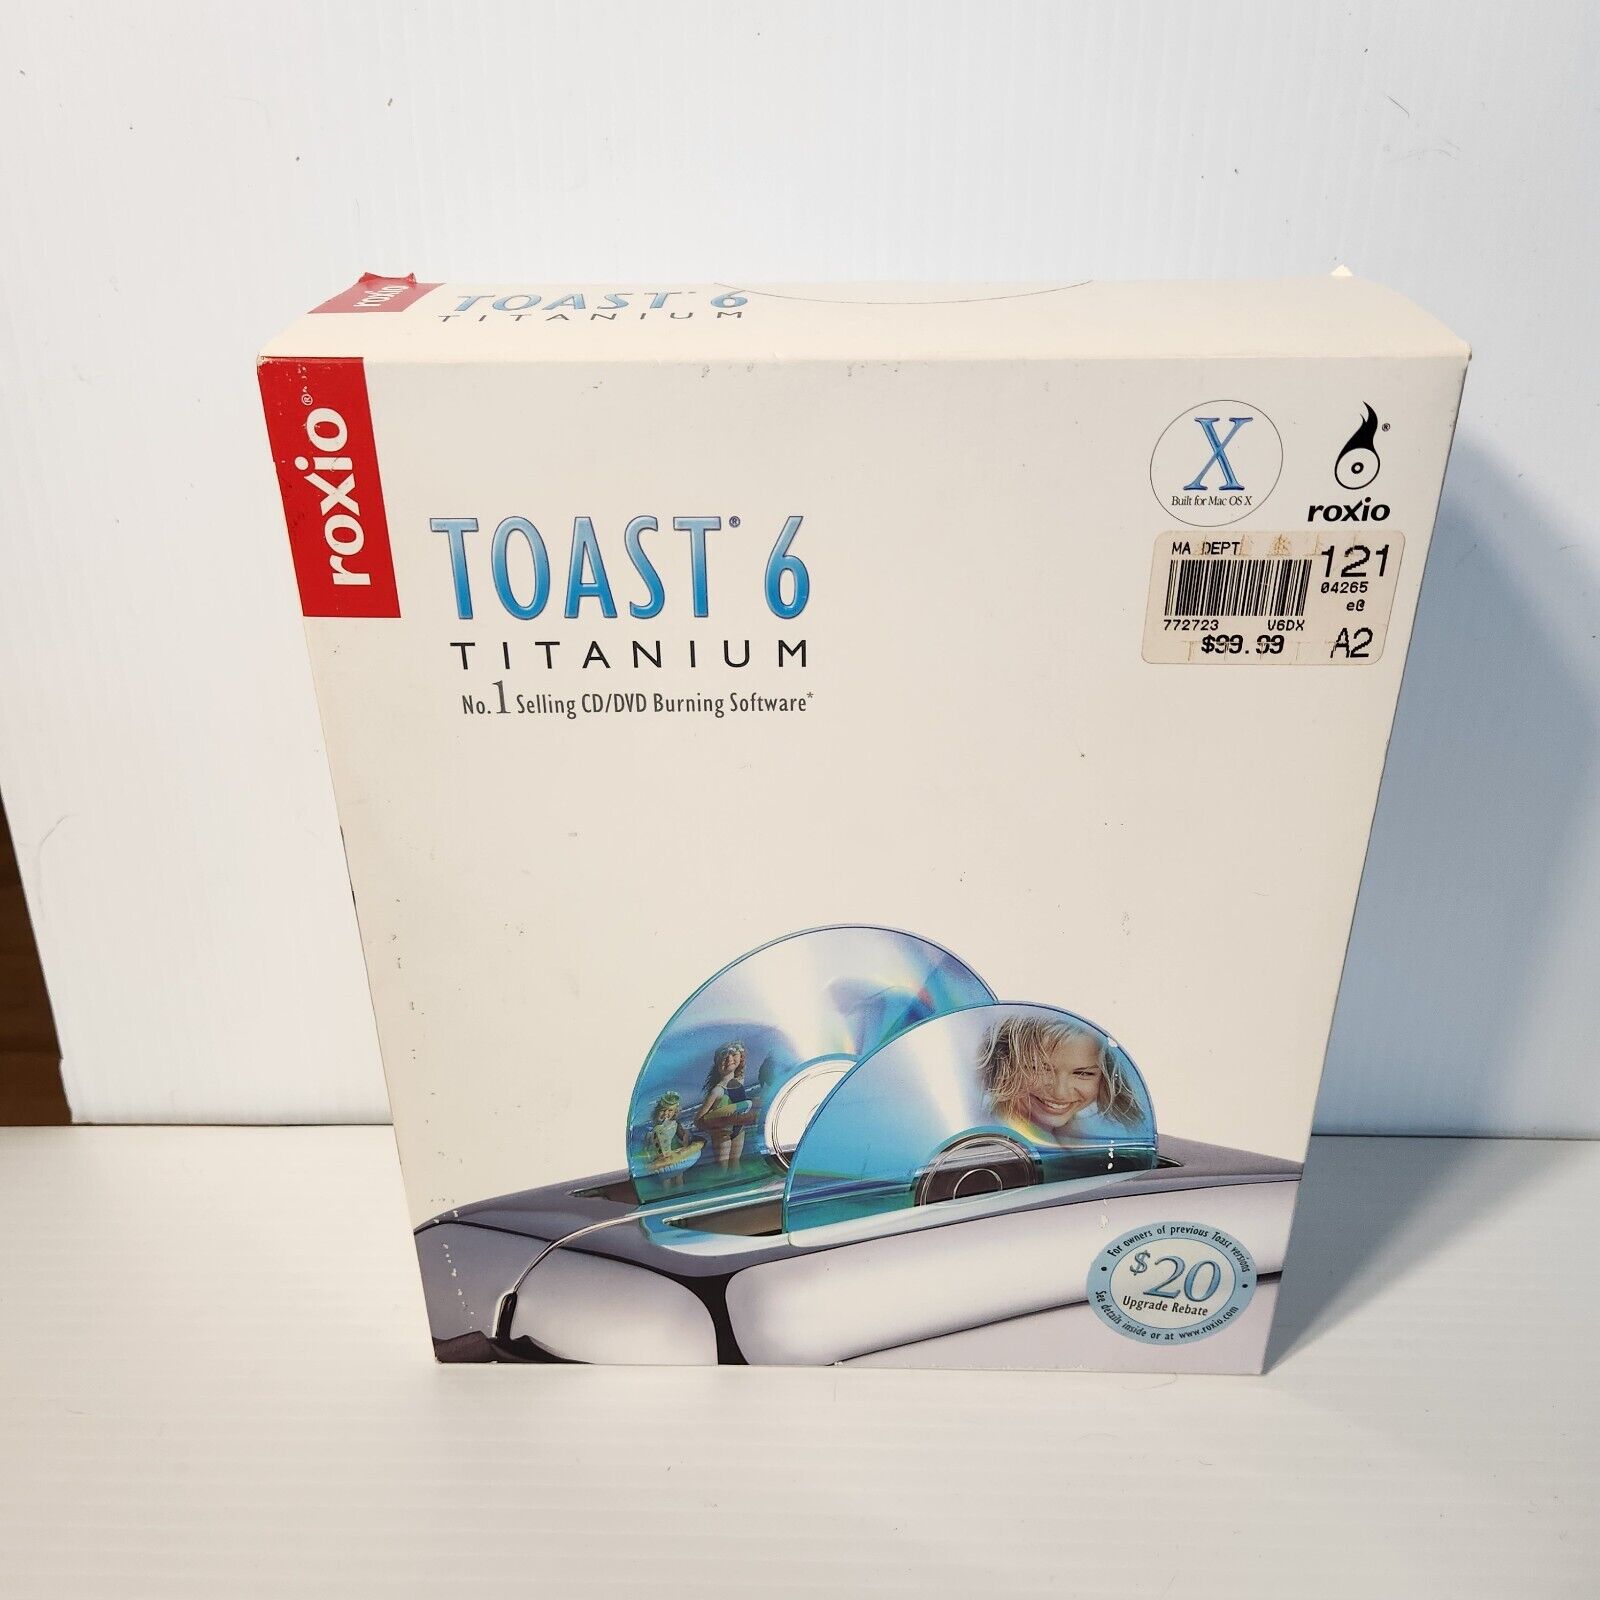 Toast 6 Titanium CD DVD Burning Software for MAC computers FACTORY SEALED BOX